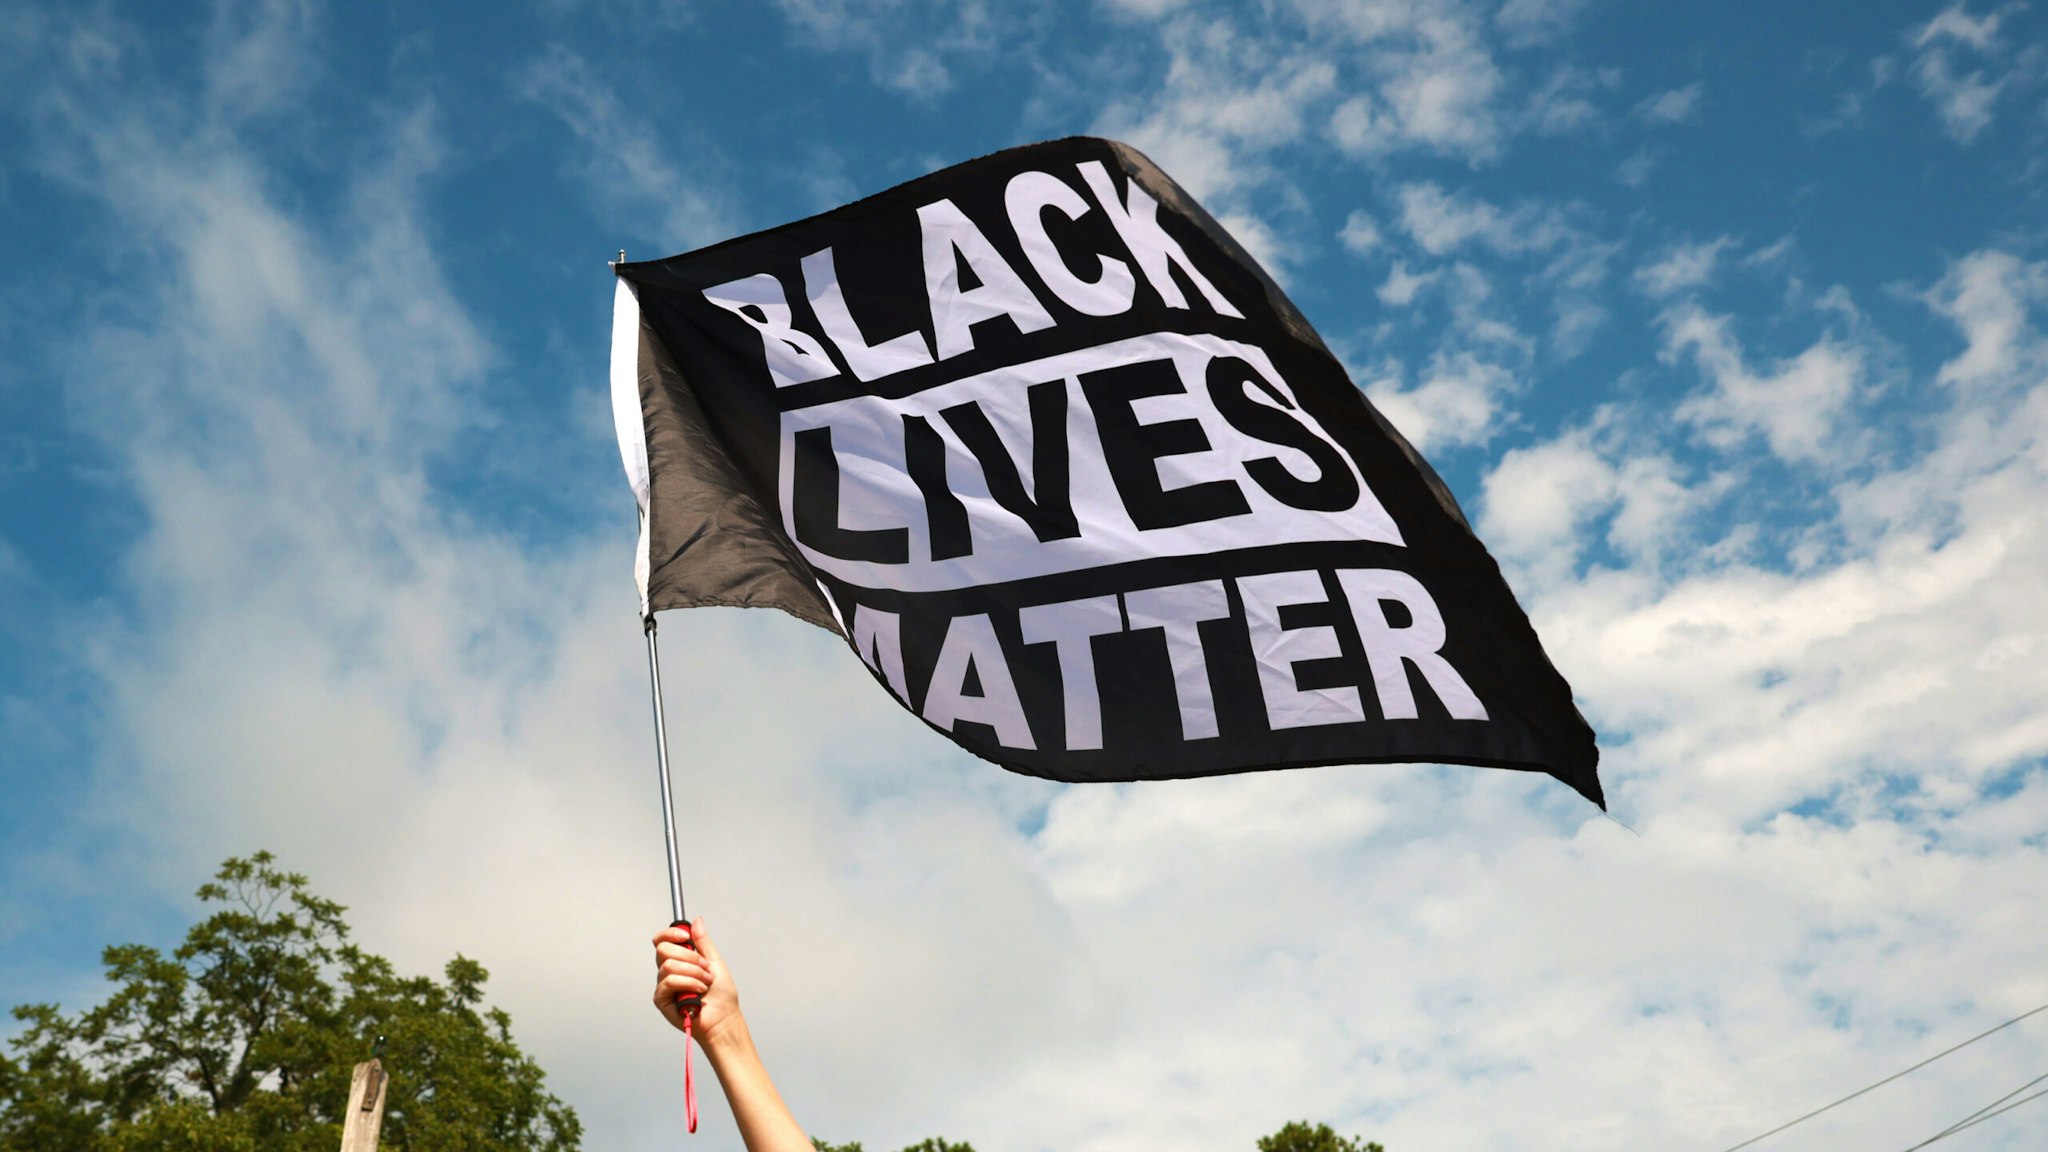 STONE MOUNTAIN, GA - AUGUST 15: A woman waves a Black Lives Matter flag during a far-right rally on August 15, 2020 near the downtown of Stone Mountain, Georgia. Georgia's Stone Mountain Park which is famous for its large rock carving of Confederate leaders planned to close on Saturday in response to a planned right-wing rally.